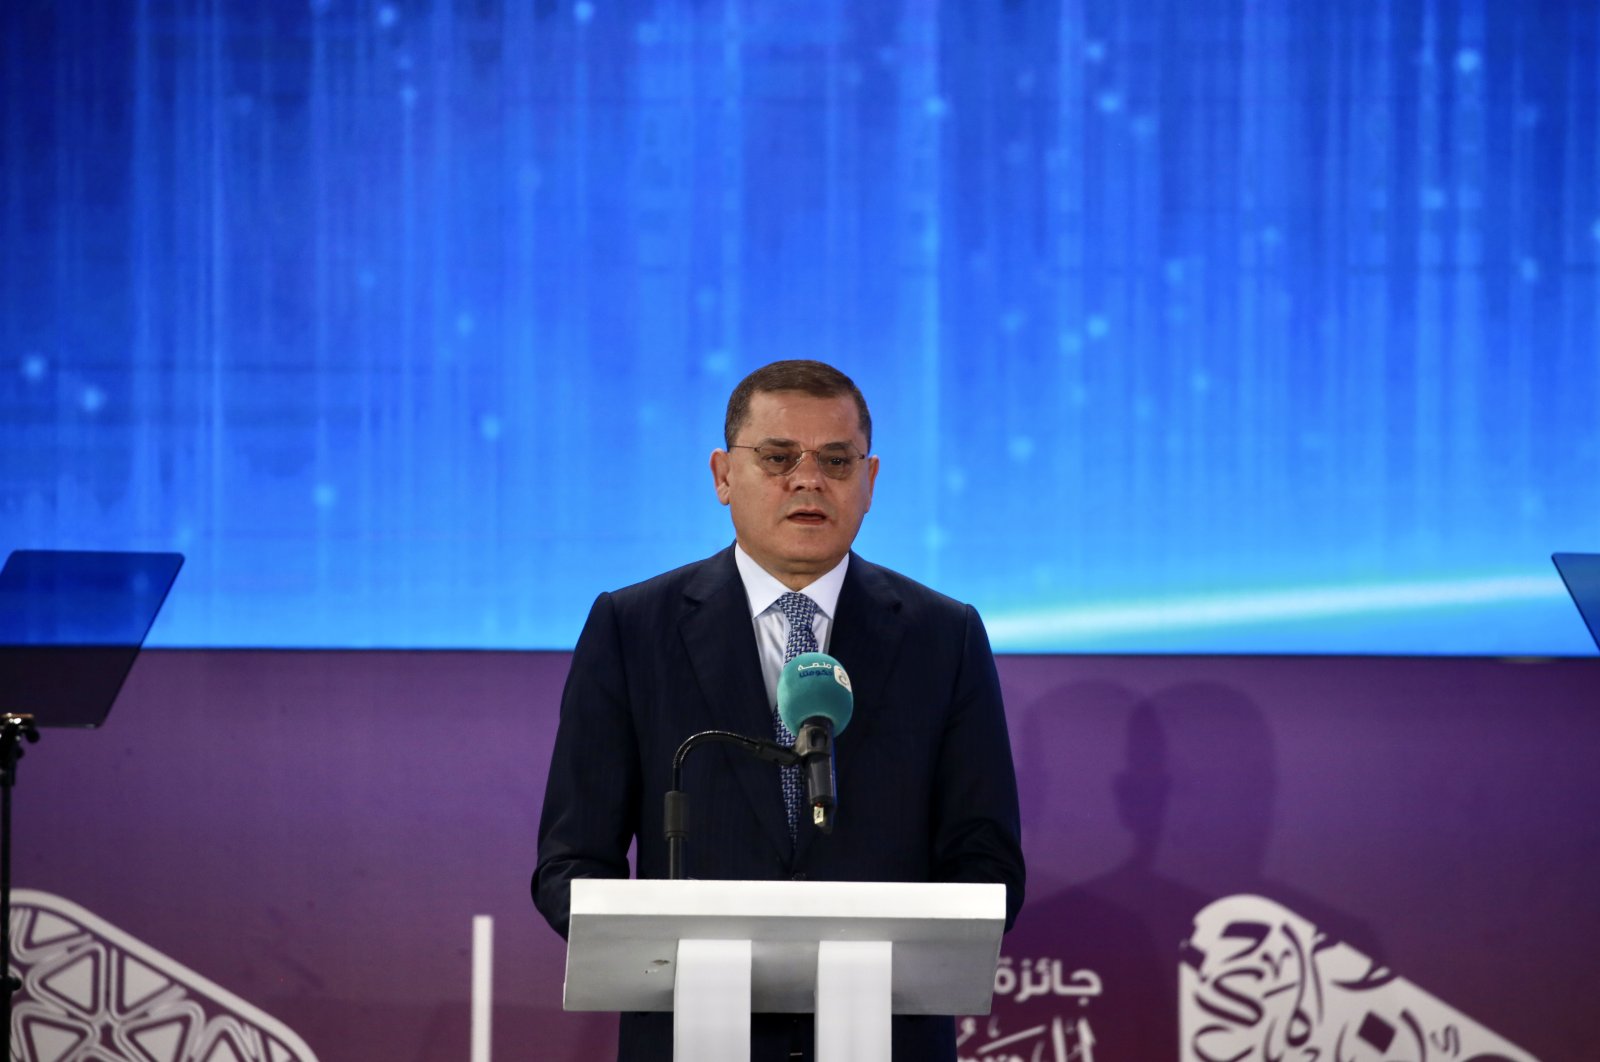 Libyan Prime Minister Abdul Hamid Dbeibah delivers the opening speech at the Forum of Tripoli for Government Communication in the capital, Tripoli, Libya, Dec. 23, 2022. (AA Photo)